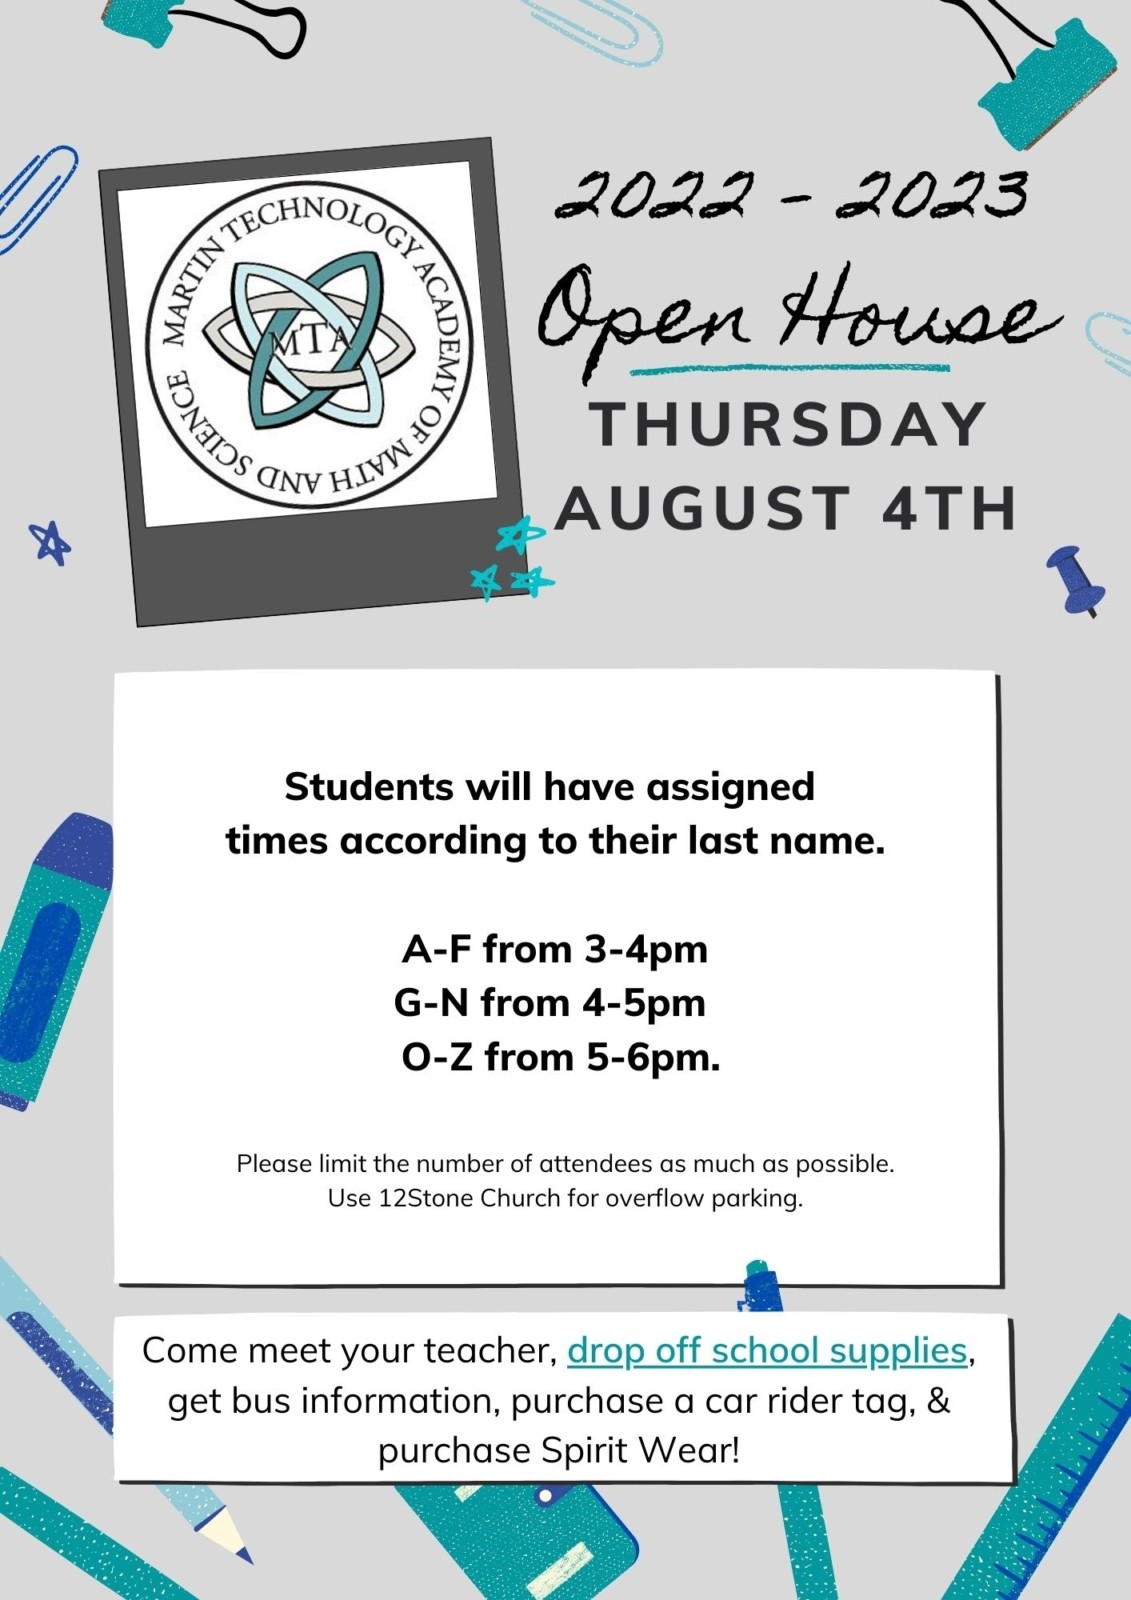 2022 - 2023 Back to School Open House